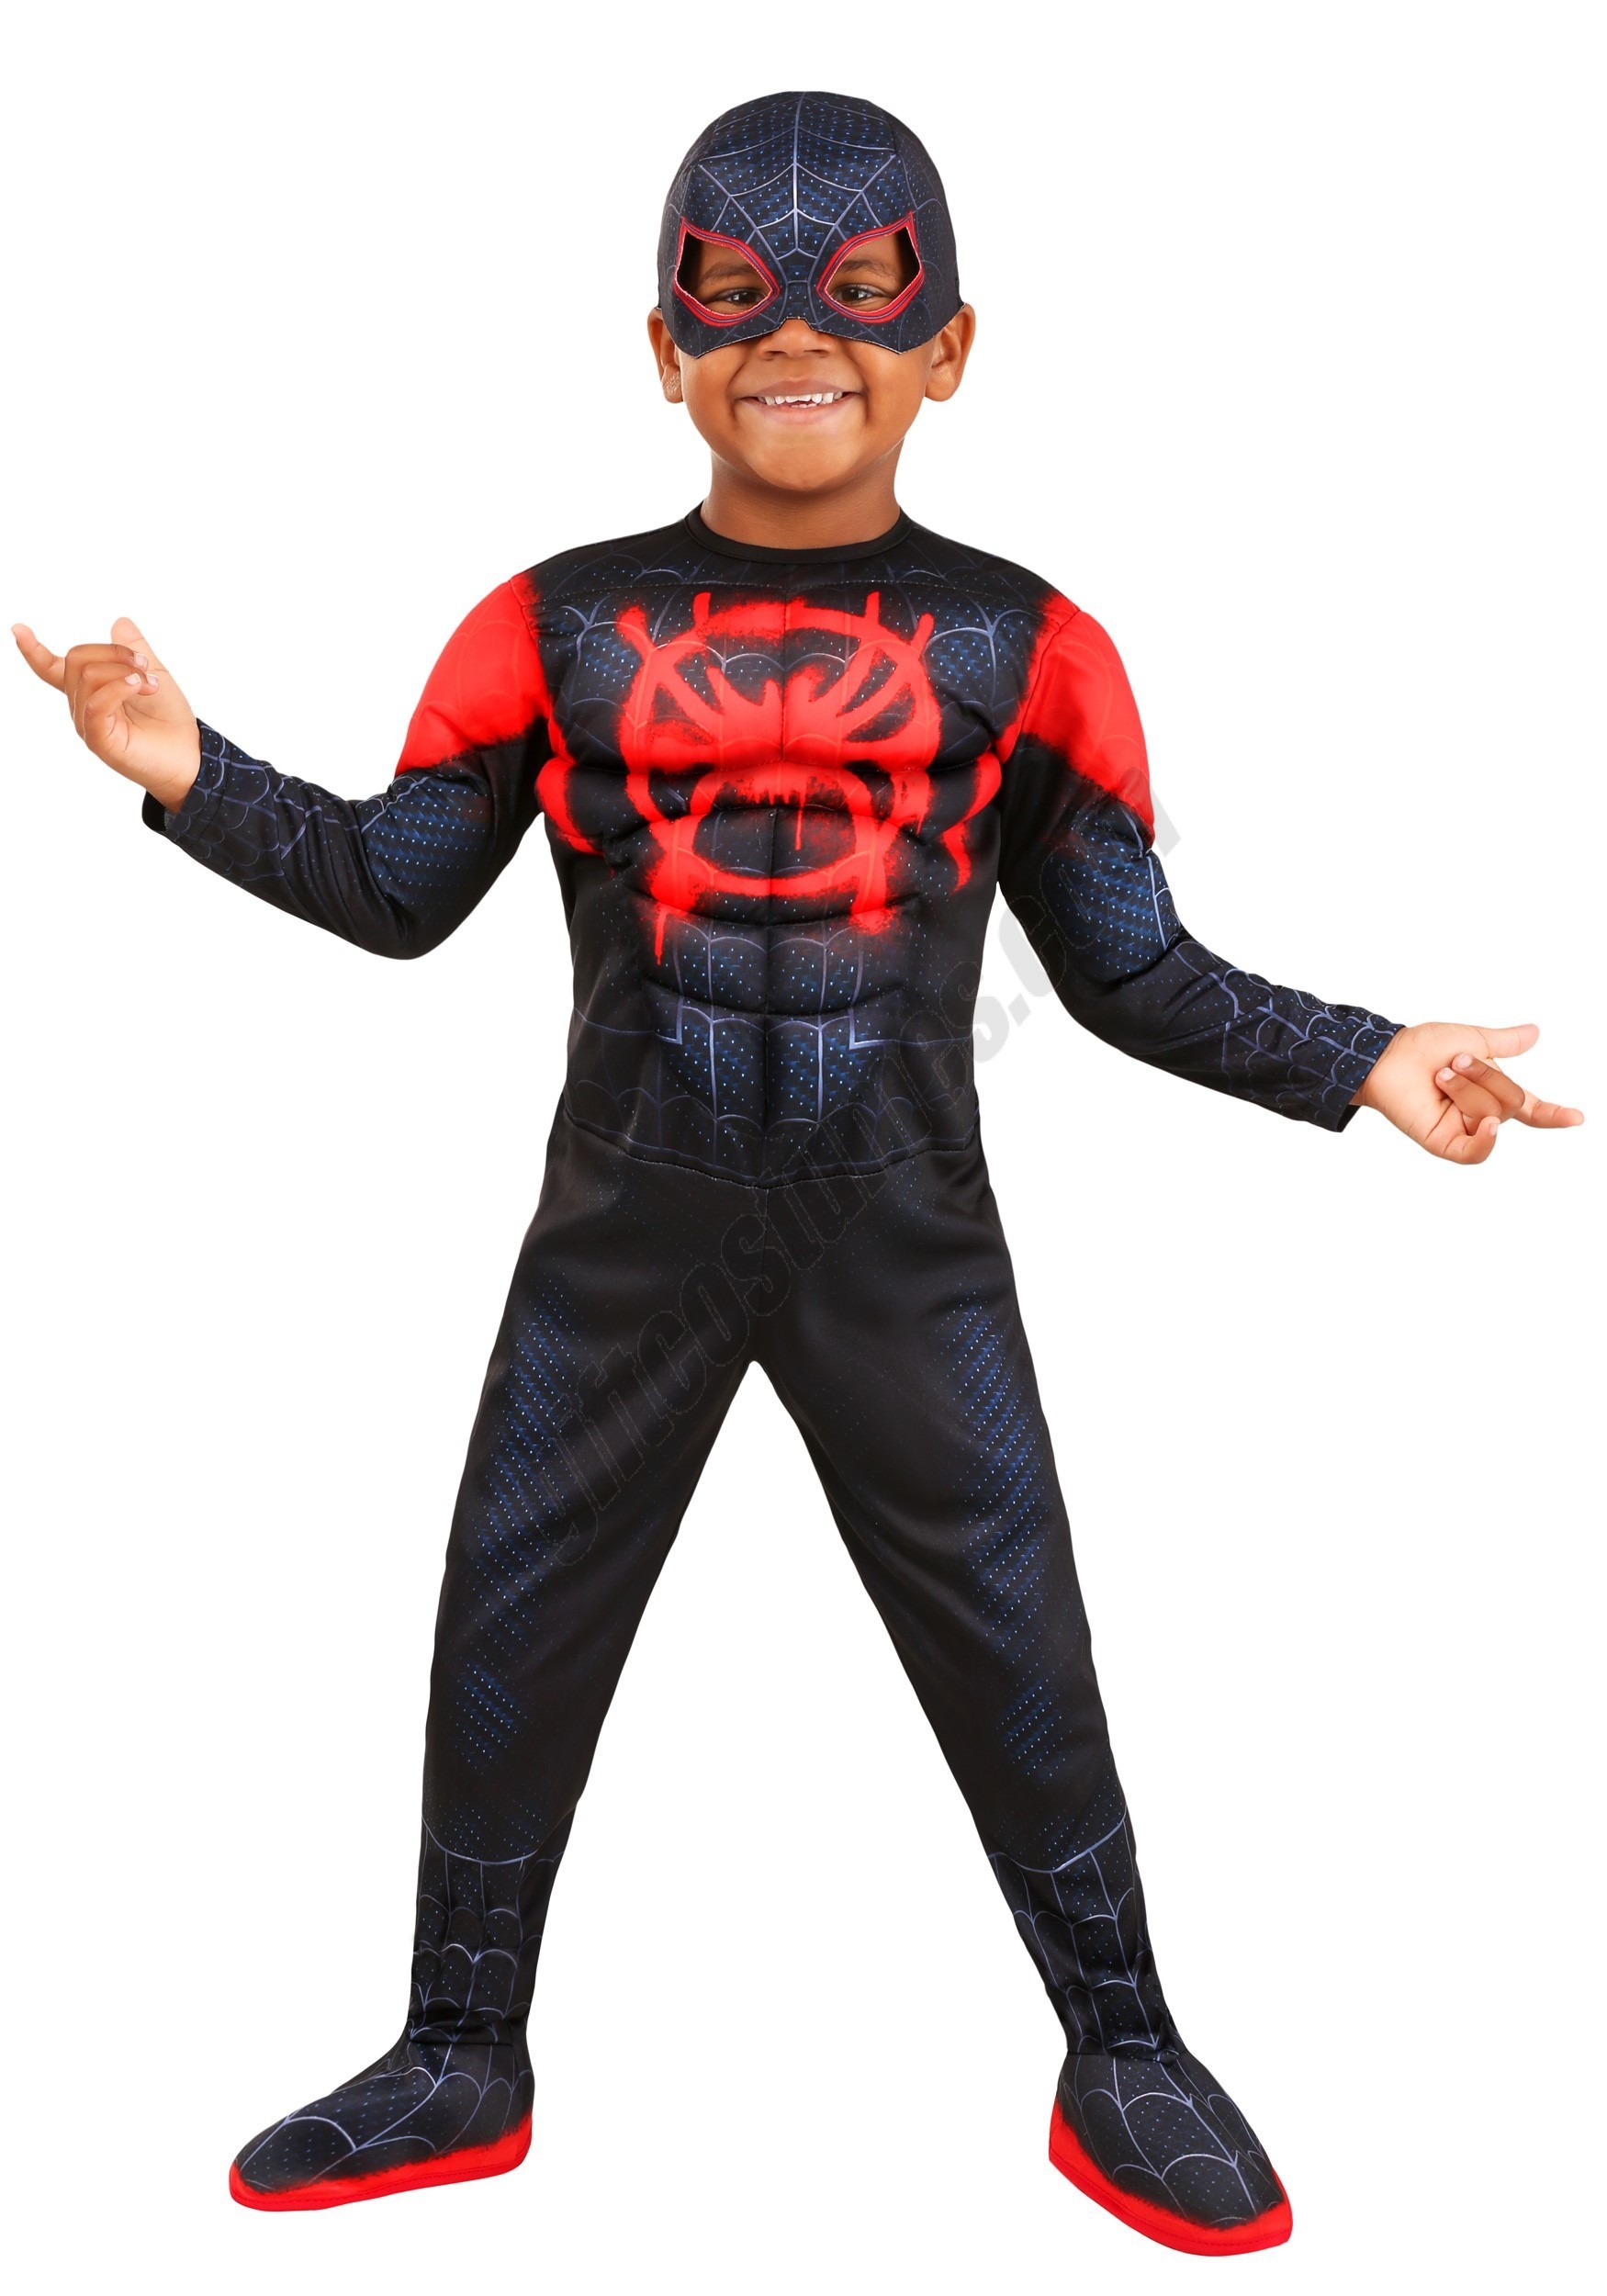 Toddler's Deluxe Spiderman Miles Morales Costume Promotions - Toddler's Deluxe Spiderman Miles Morales Costume Promotions